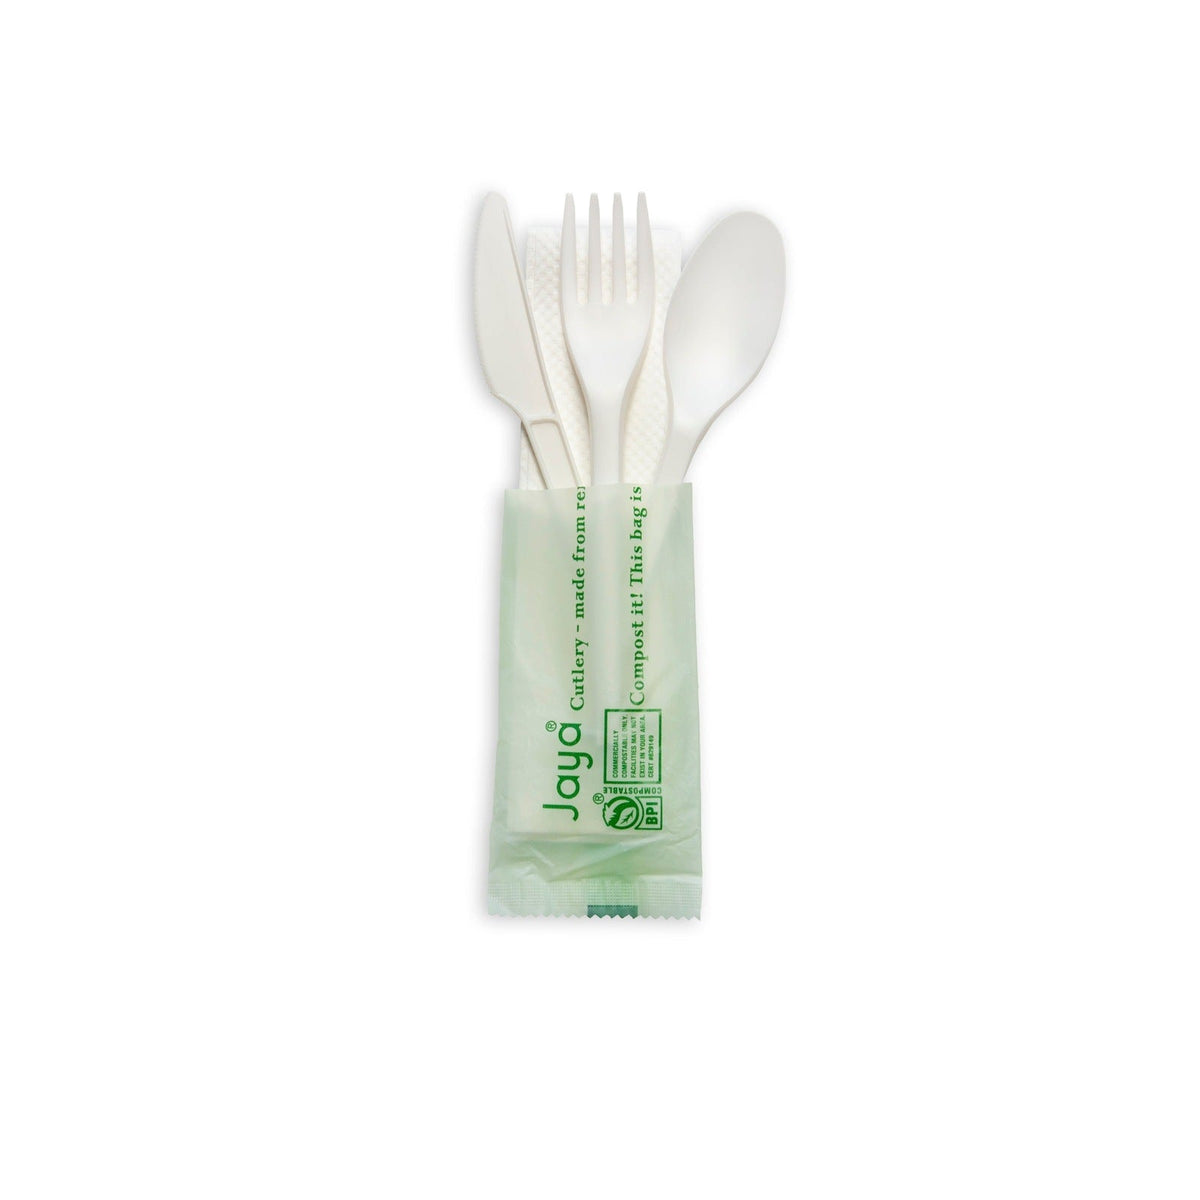 6" Medium Weight Cutlery Kit with Napkin, White, 250-Count Case" by TheLotusGroup - Good For The Earth, Good For Us